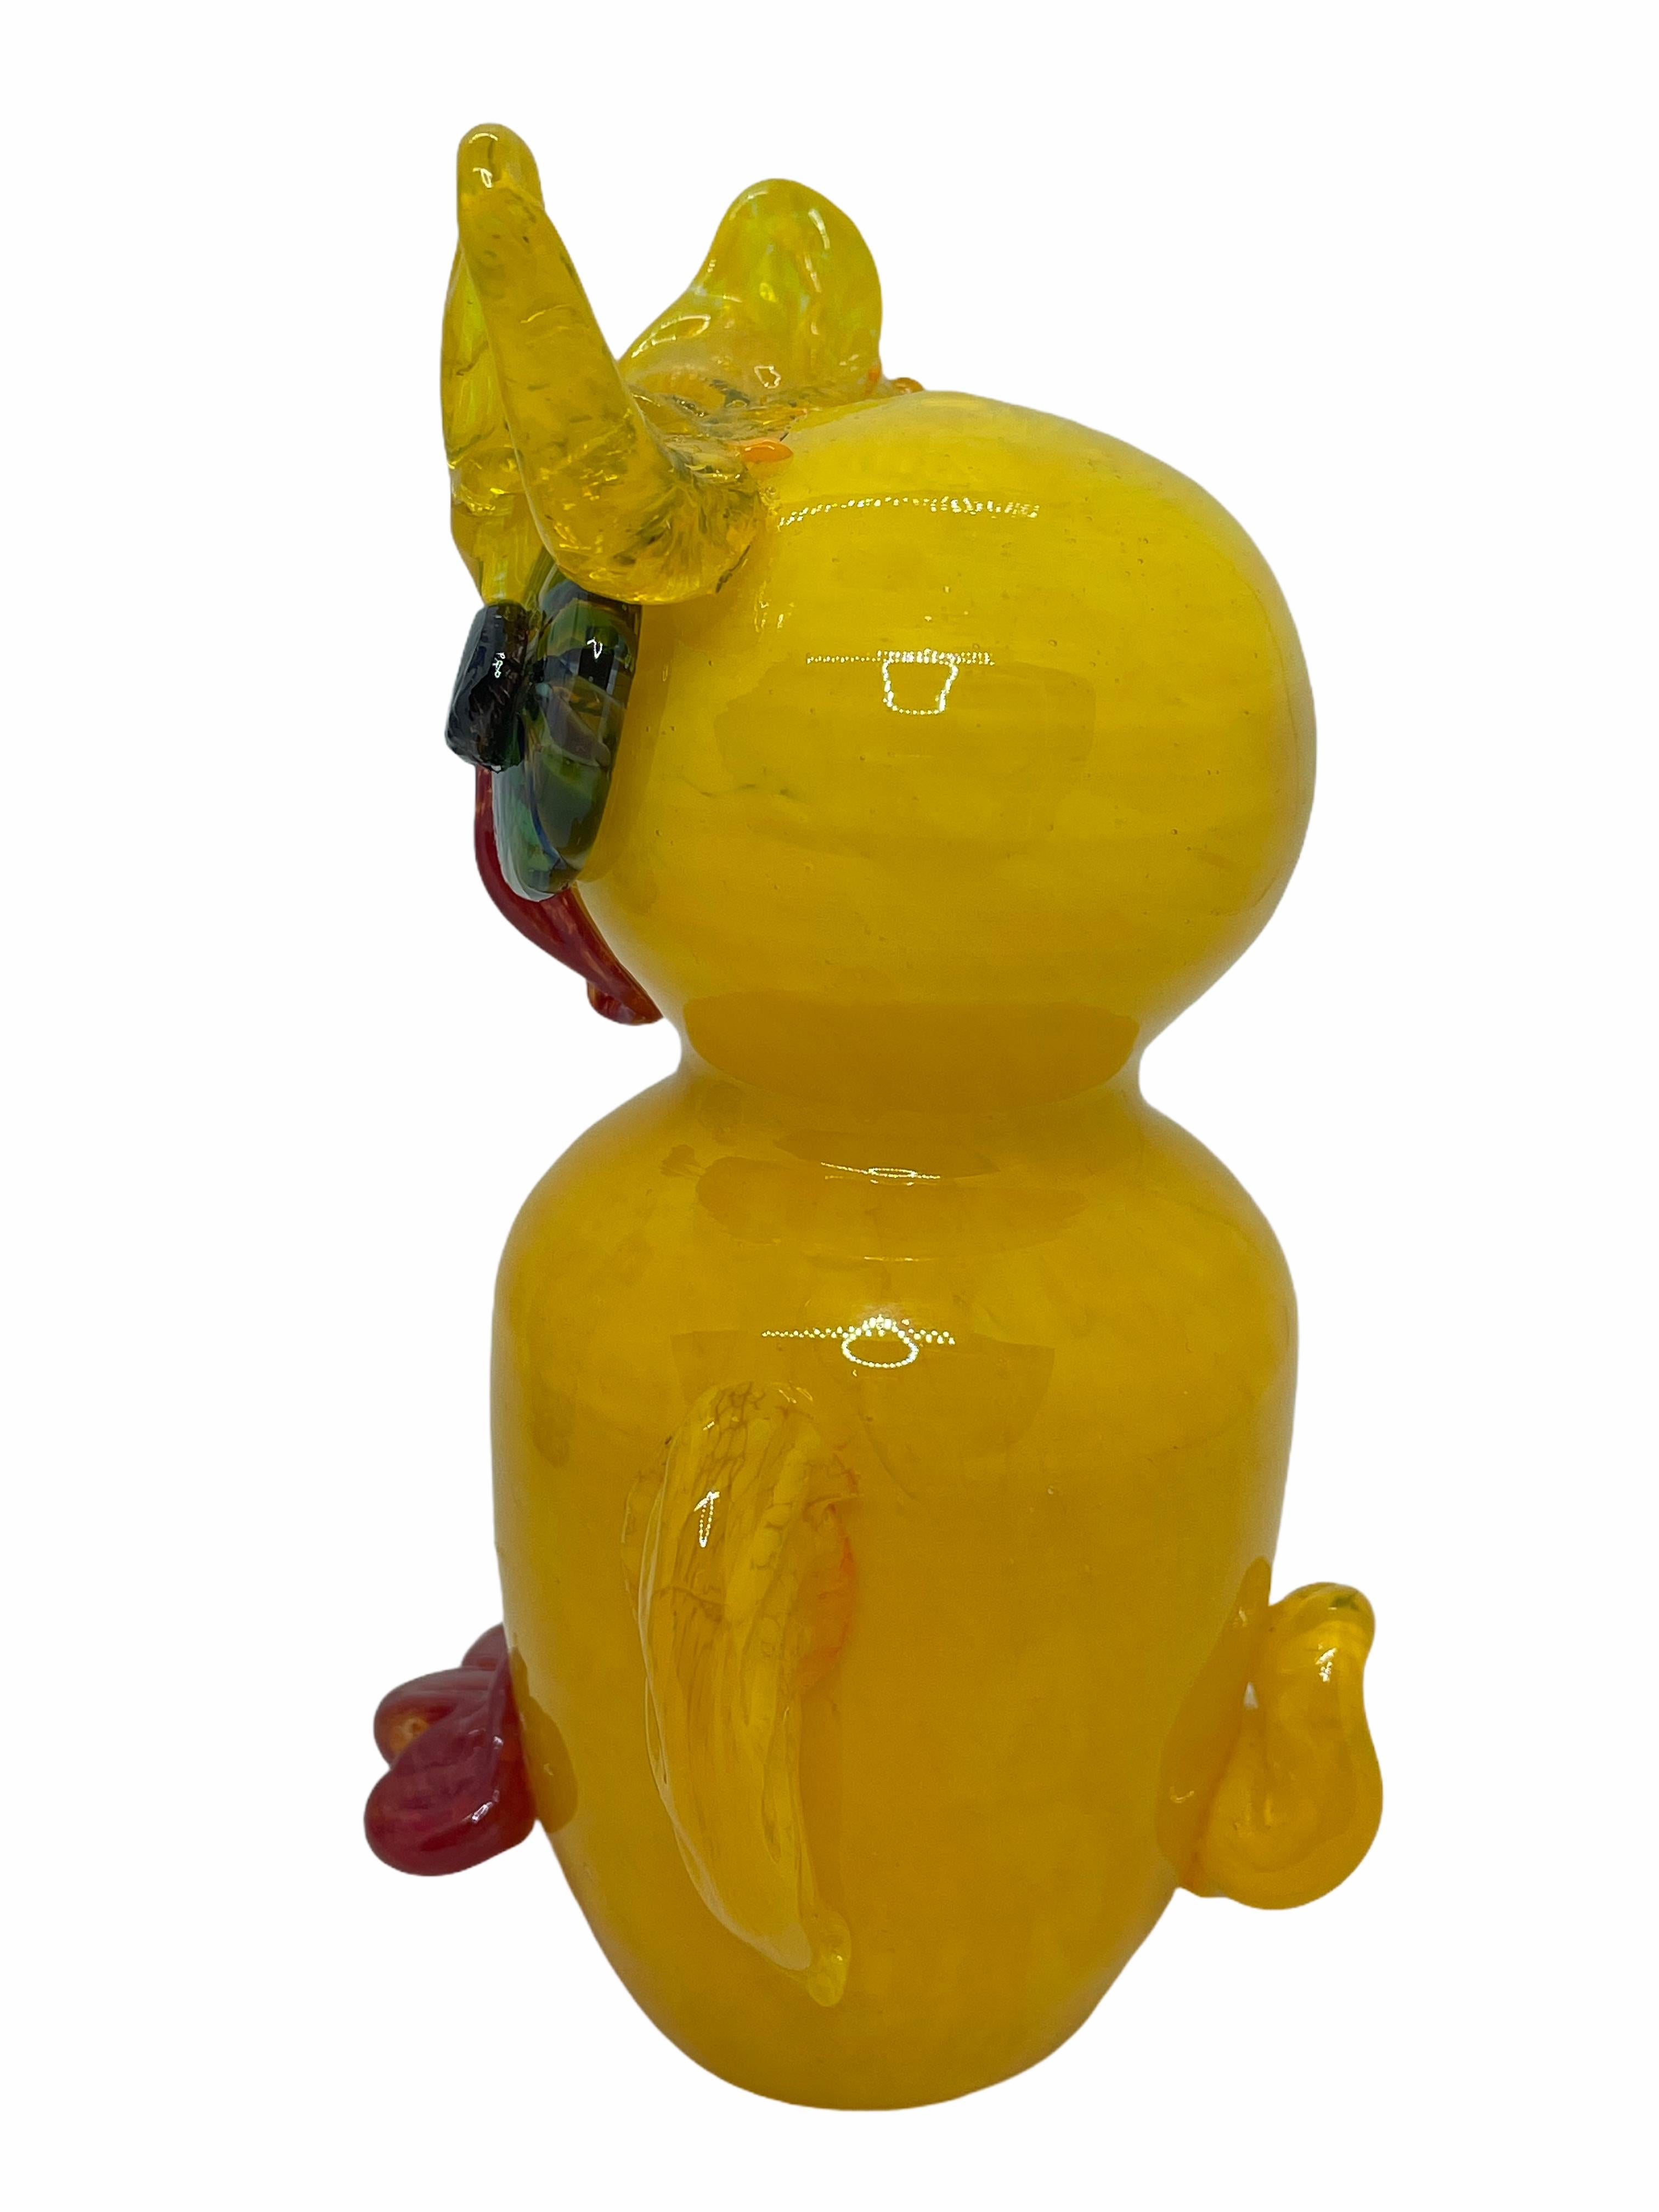 Beautiful Murano hand blown owl figure. Colors are a black, red and yellow. Made in Murano, Italy.
A great piece for any room or gift for any occasion. Brightens up any room.